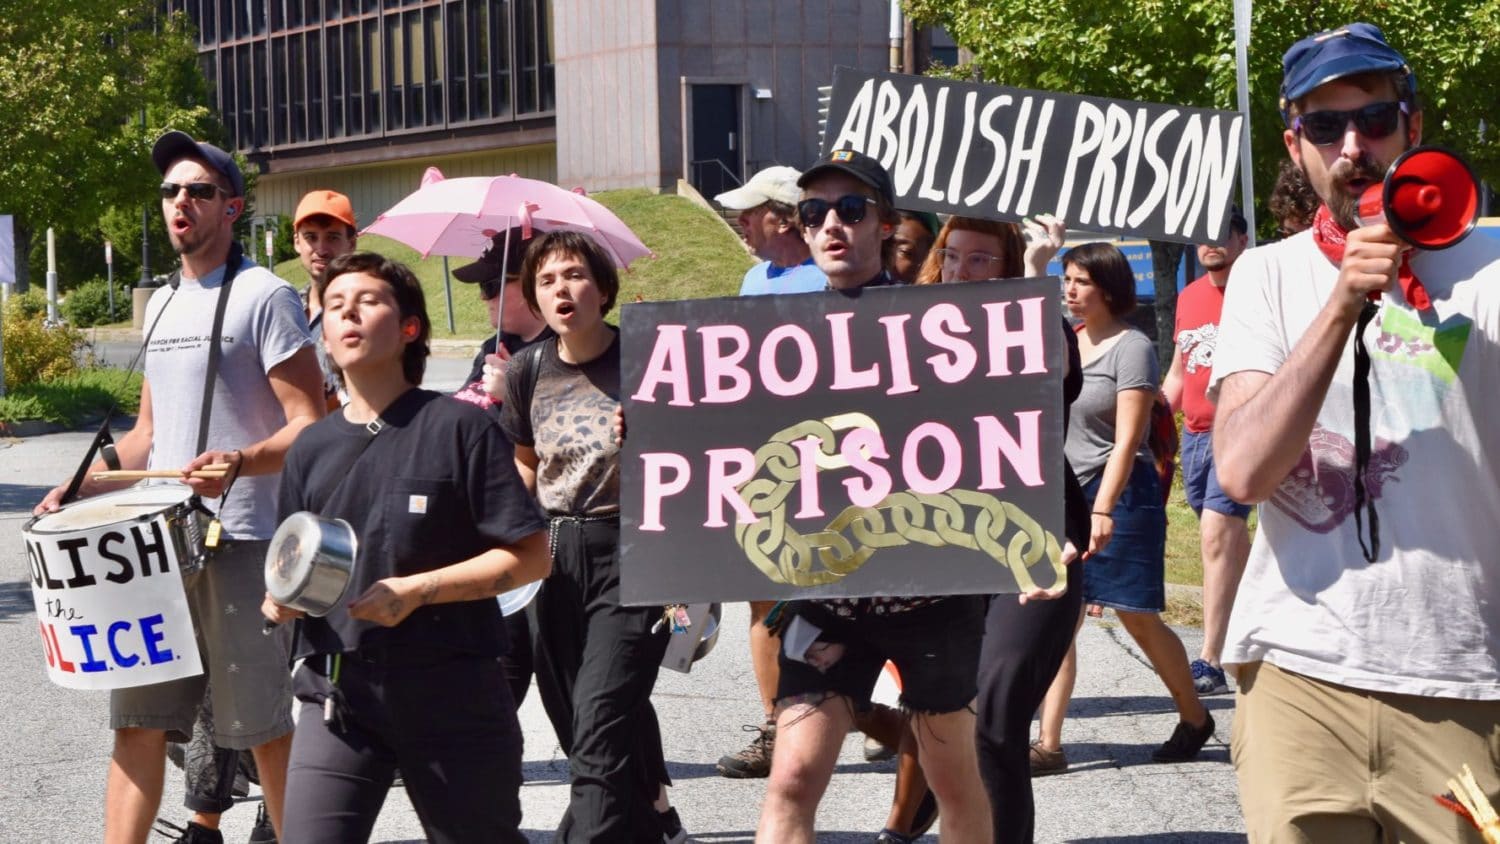 Prison Strike Solidarity Noise Demo makes contact with people incarcerated at the ACI